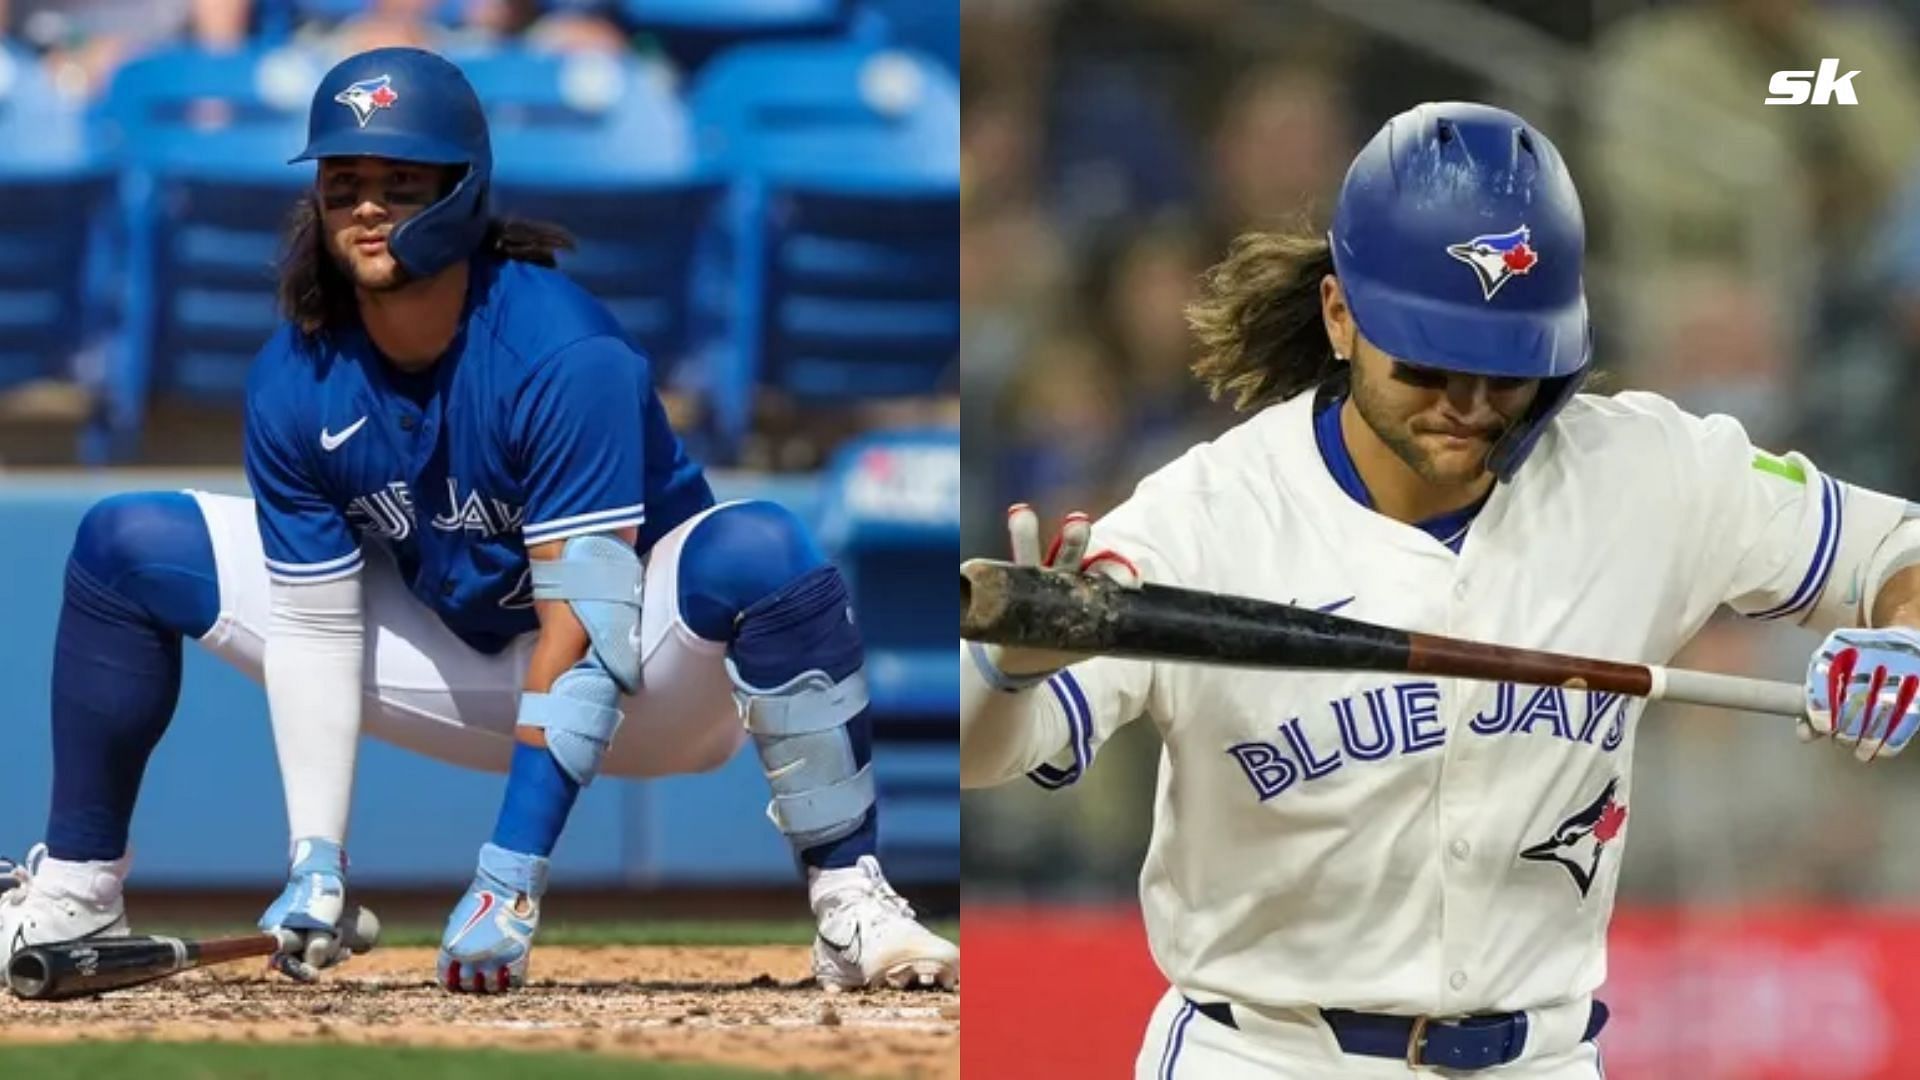 Why was Blue Jays slugger Bo Bichette ejected? Exploring what led to the heated exchange on Saturday